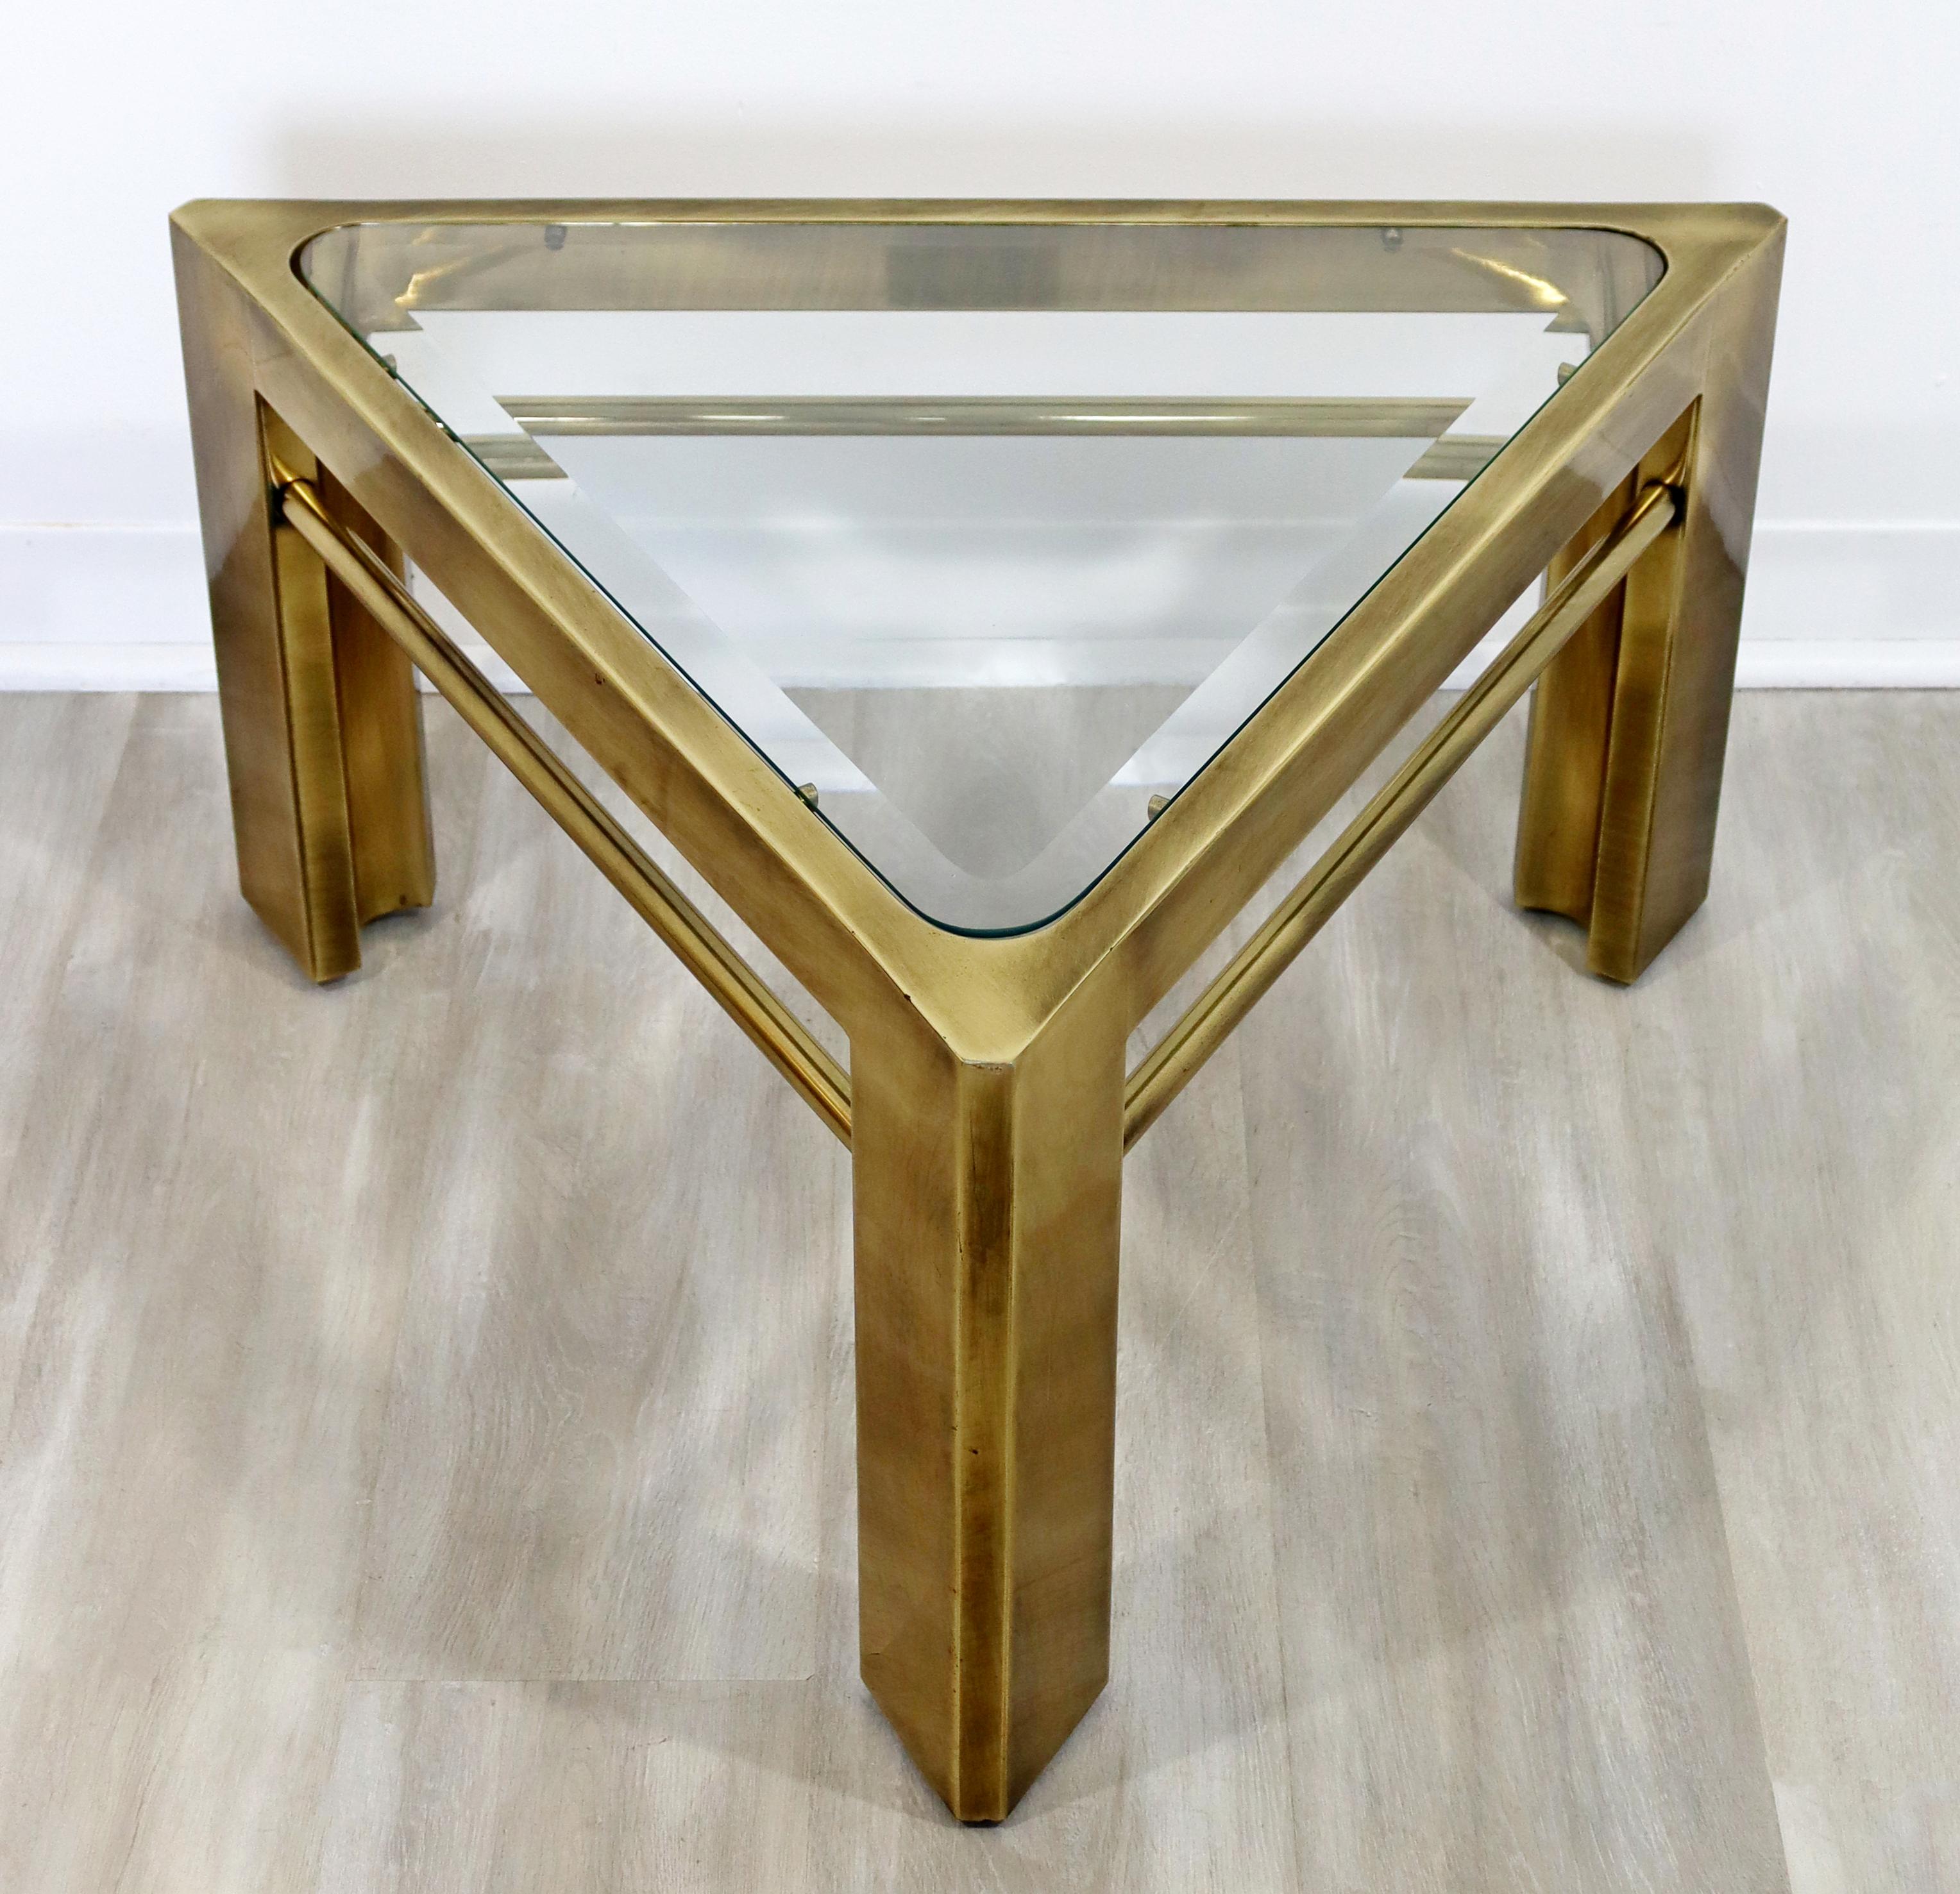 For your consideration is a terrific, triangle shaped coffee table, with a glass top on a brass base, by Mastercraft, circa the 1960s. In excellent vintage condition. The dimensions are 29